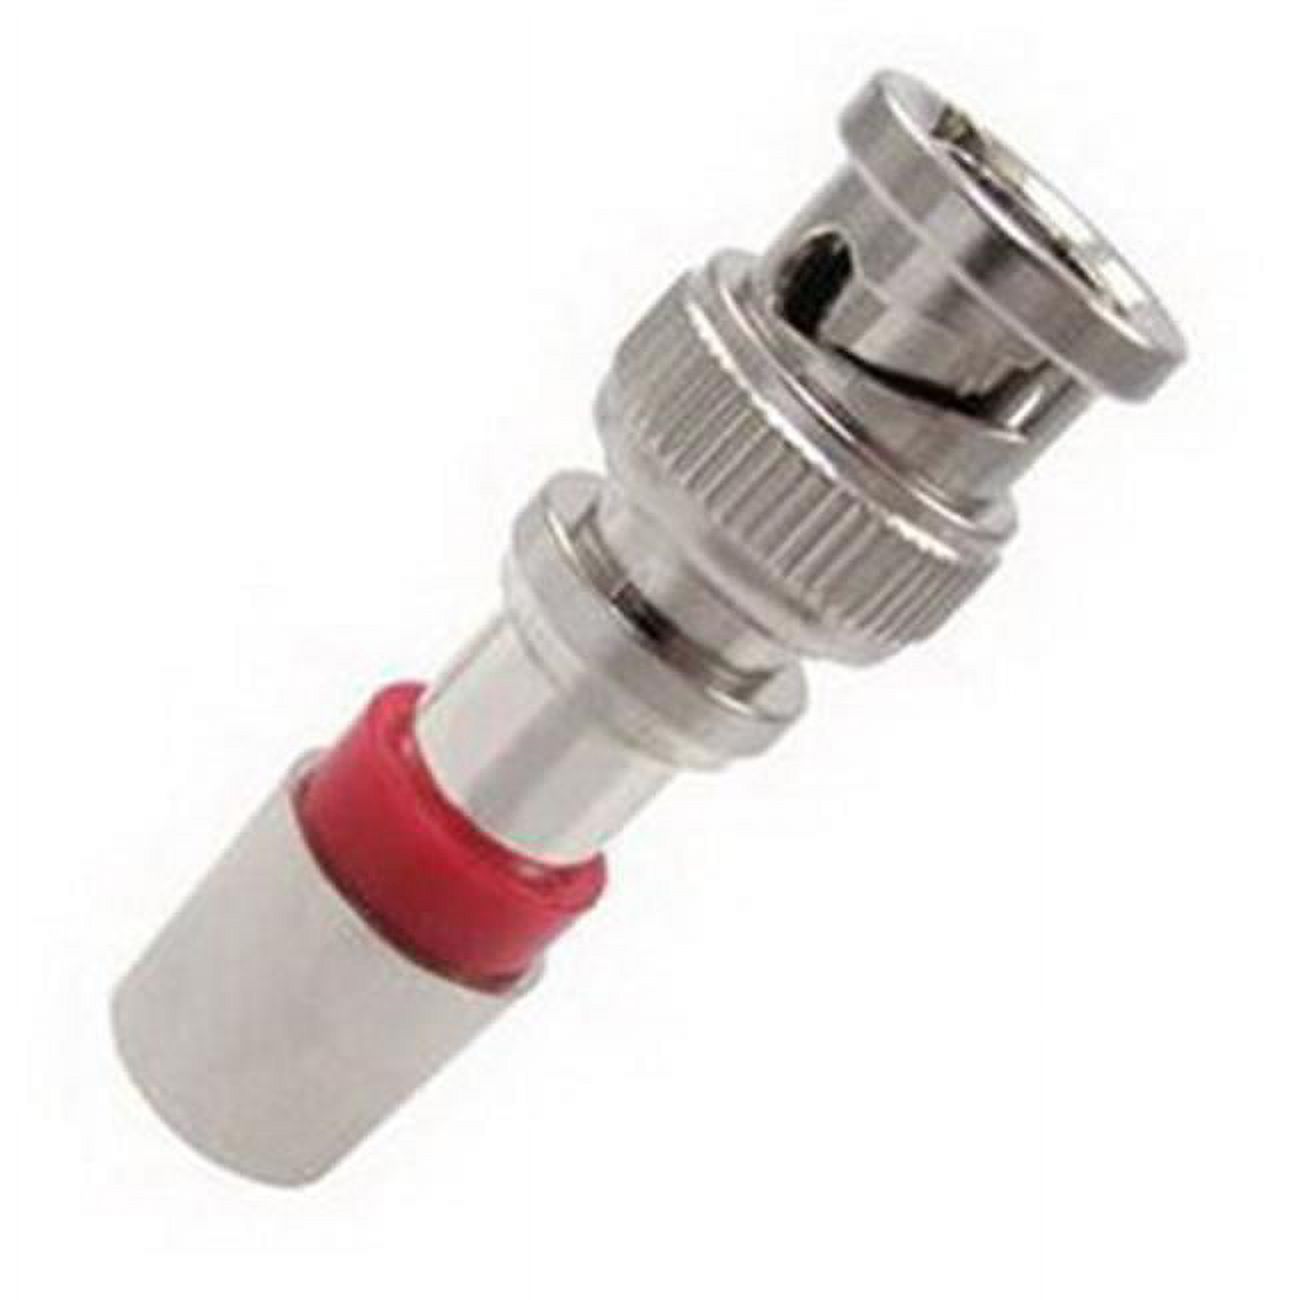 RG-59, Universal BNC Connector - Nickel Plated, Red - image 1 of 1